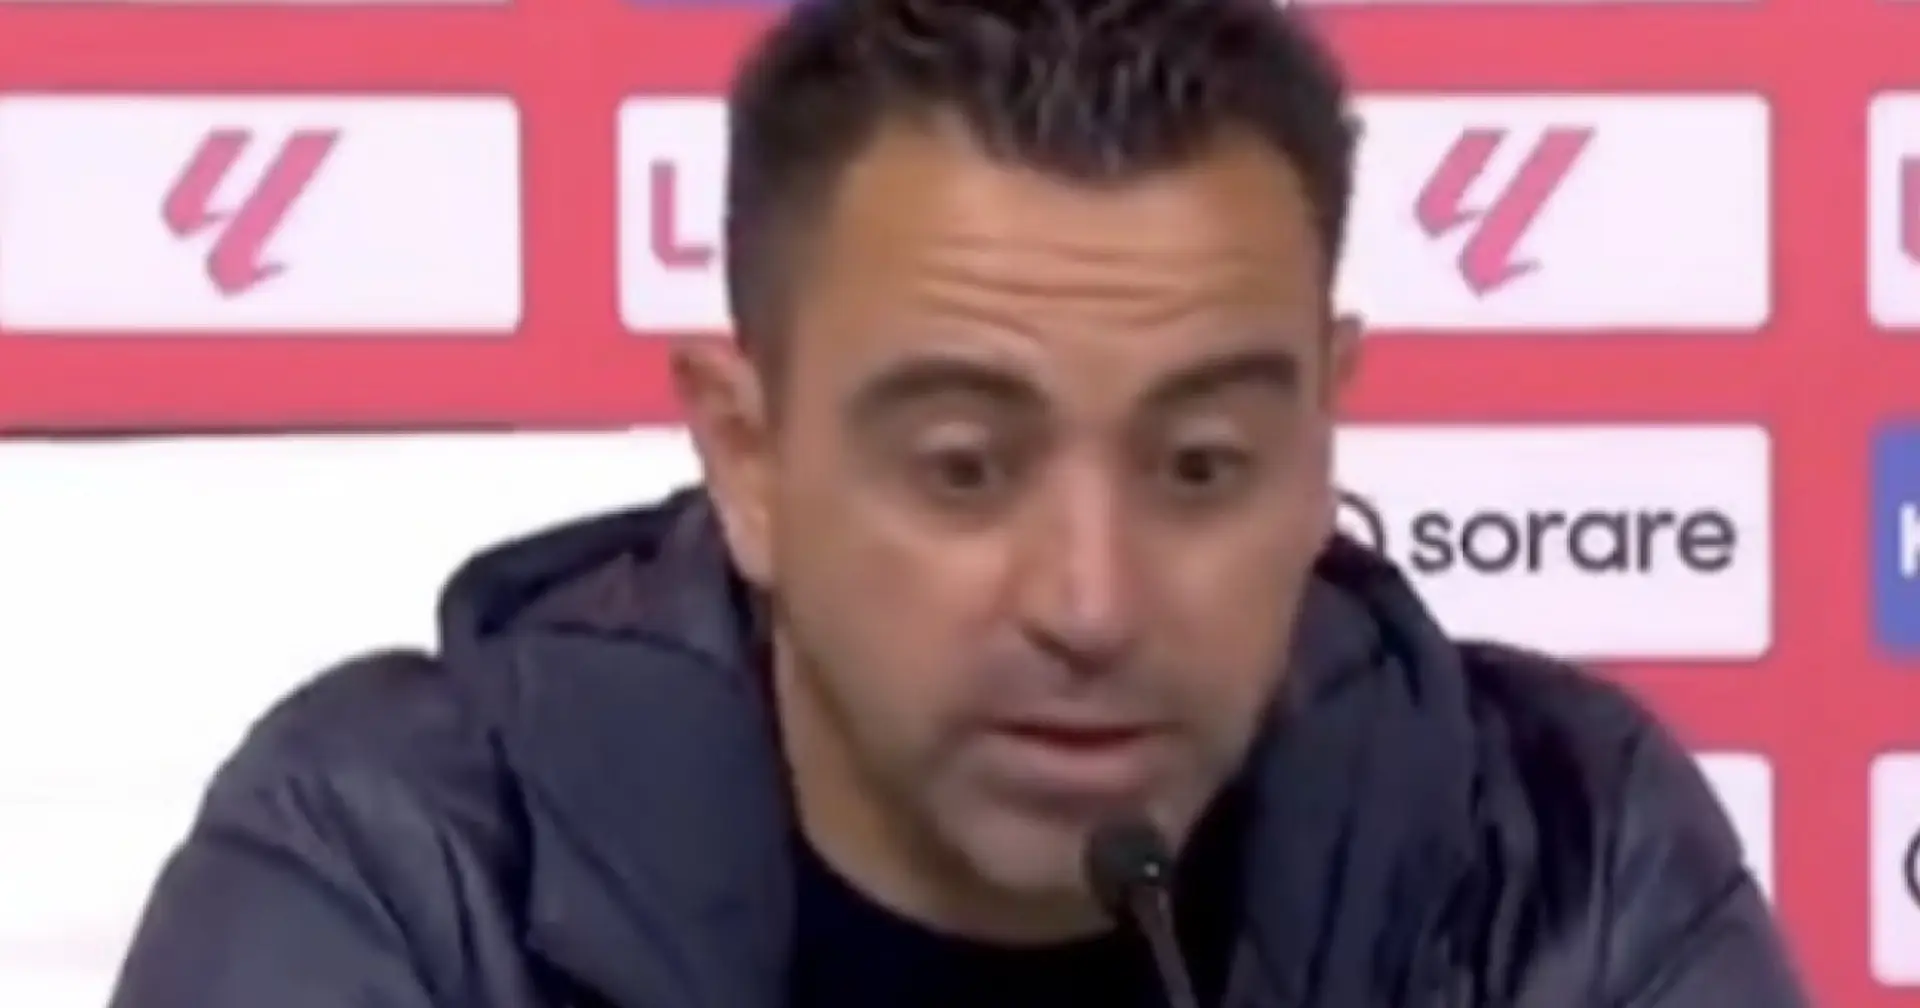 'They're always like that': Xavi reacts to rumours about Joan Laporta's entourage willing to sack him